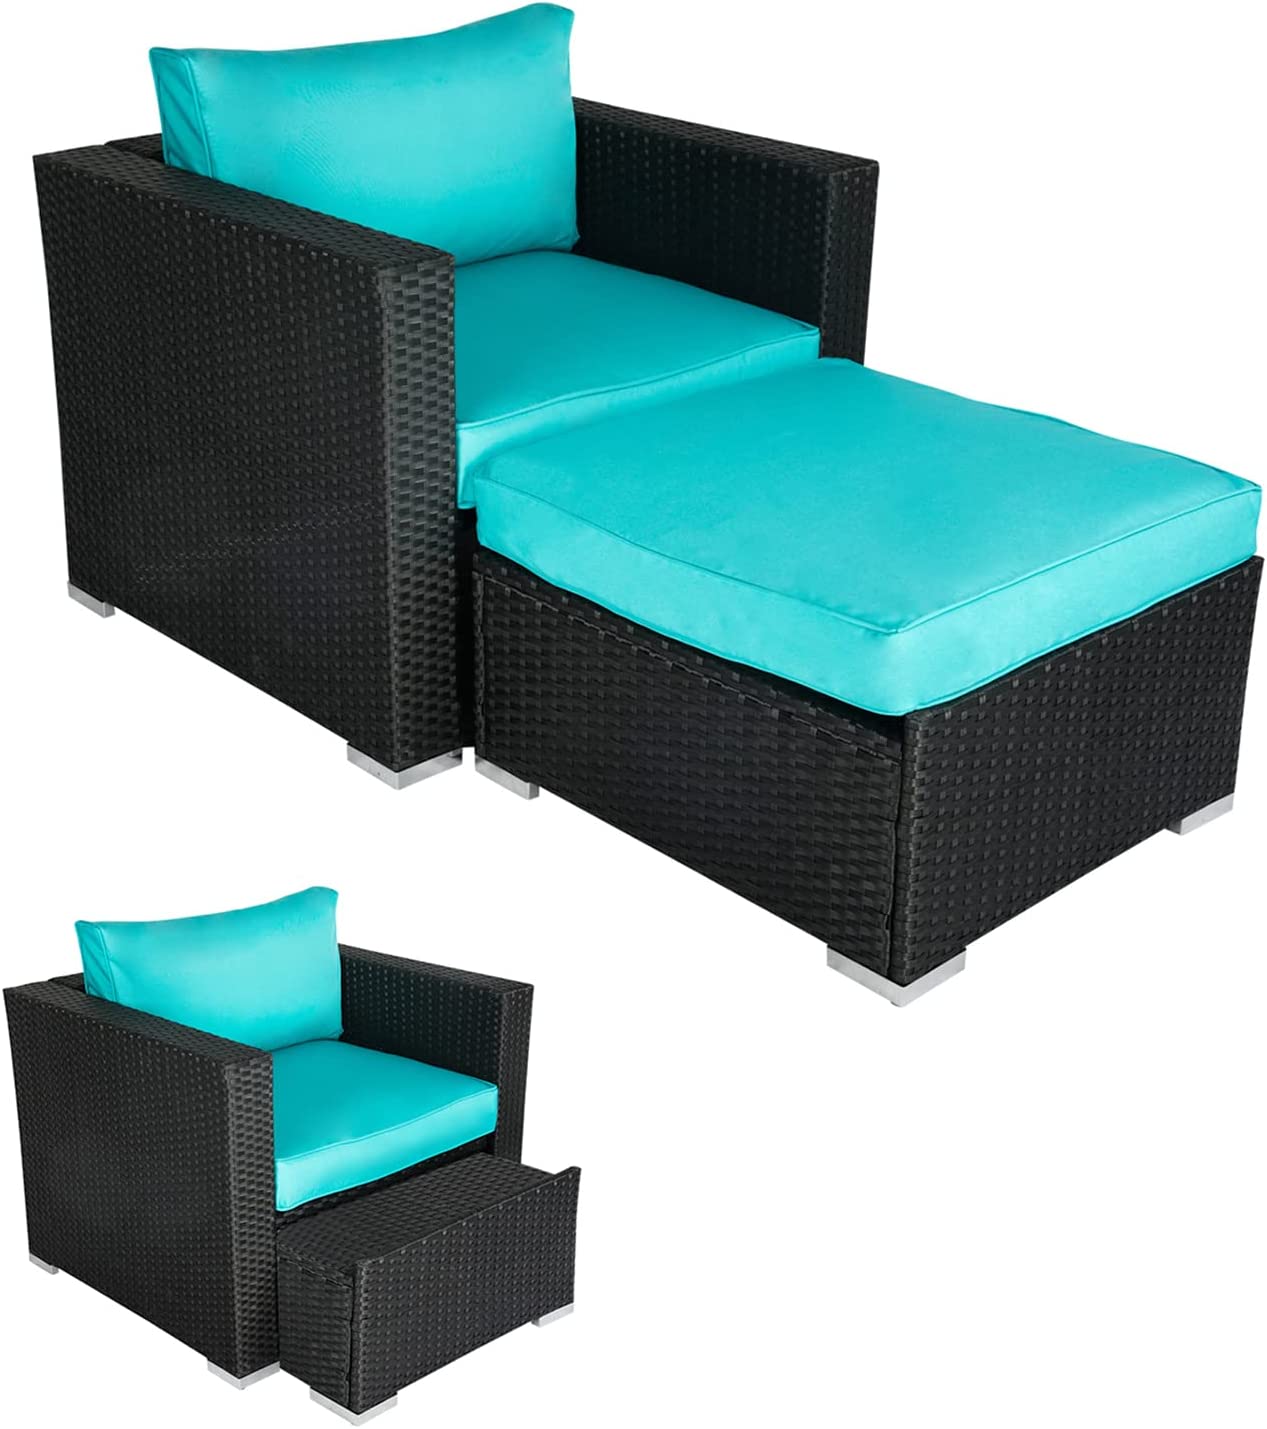 Kinbor 2pcs Outdoor Sofa Furniture PE Wicker Lounge Chair with Ottoman Sectional Conversation Set, Wicker Patio Sofa Sets, Blue - image 1 of 7